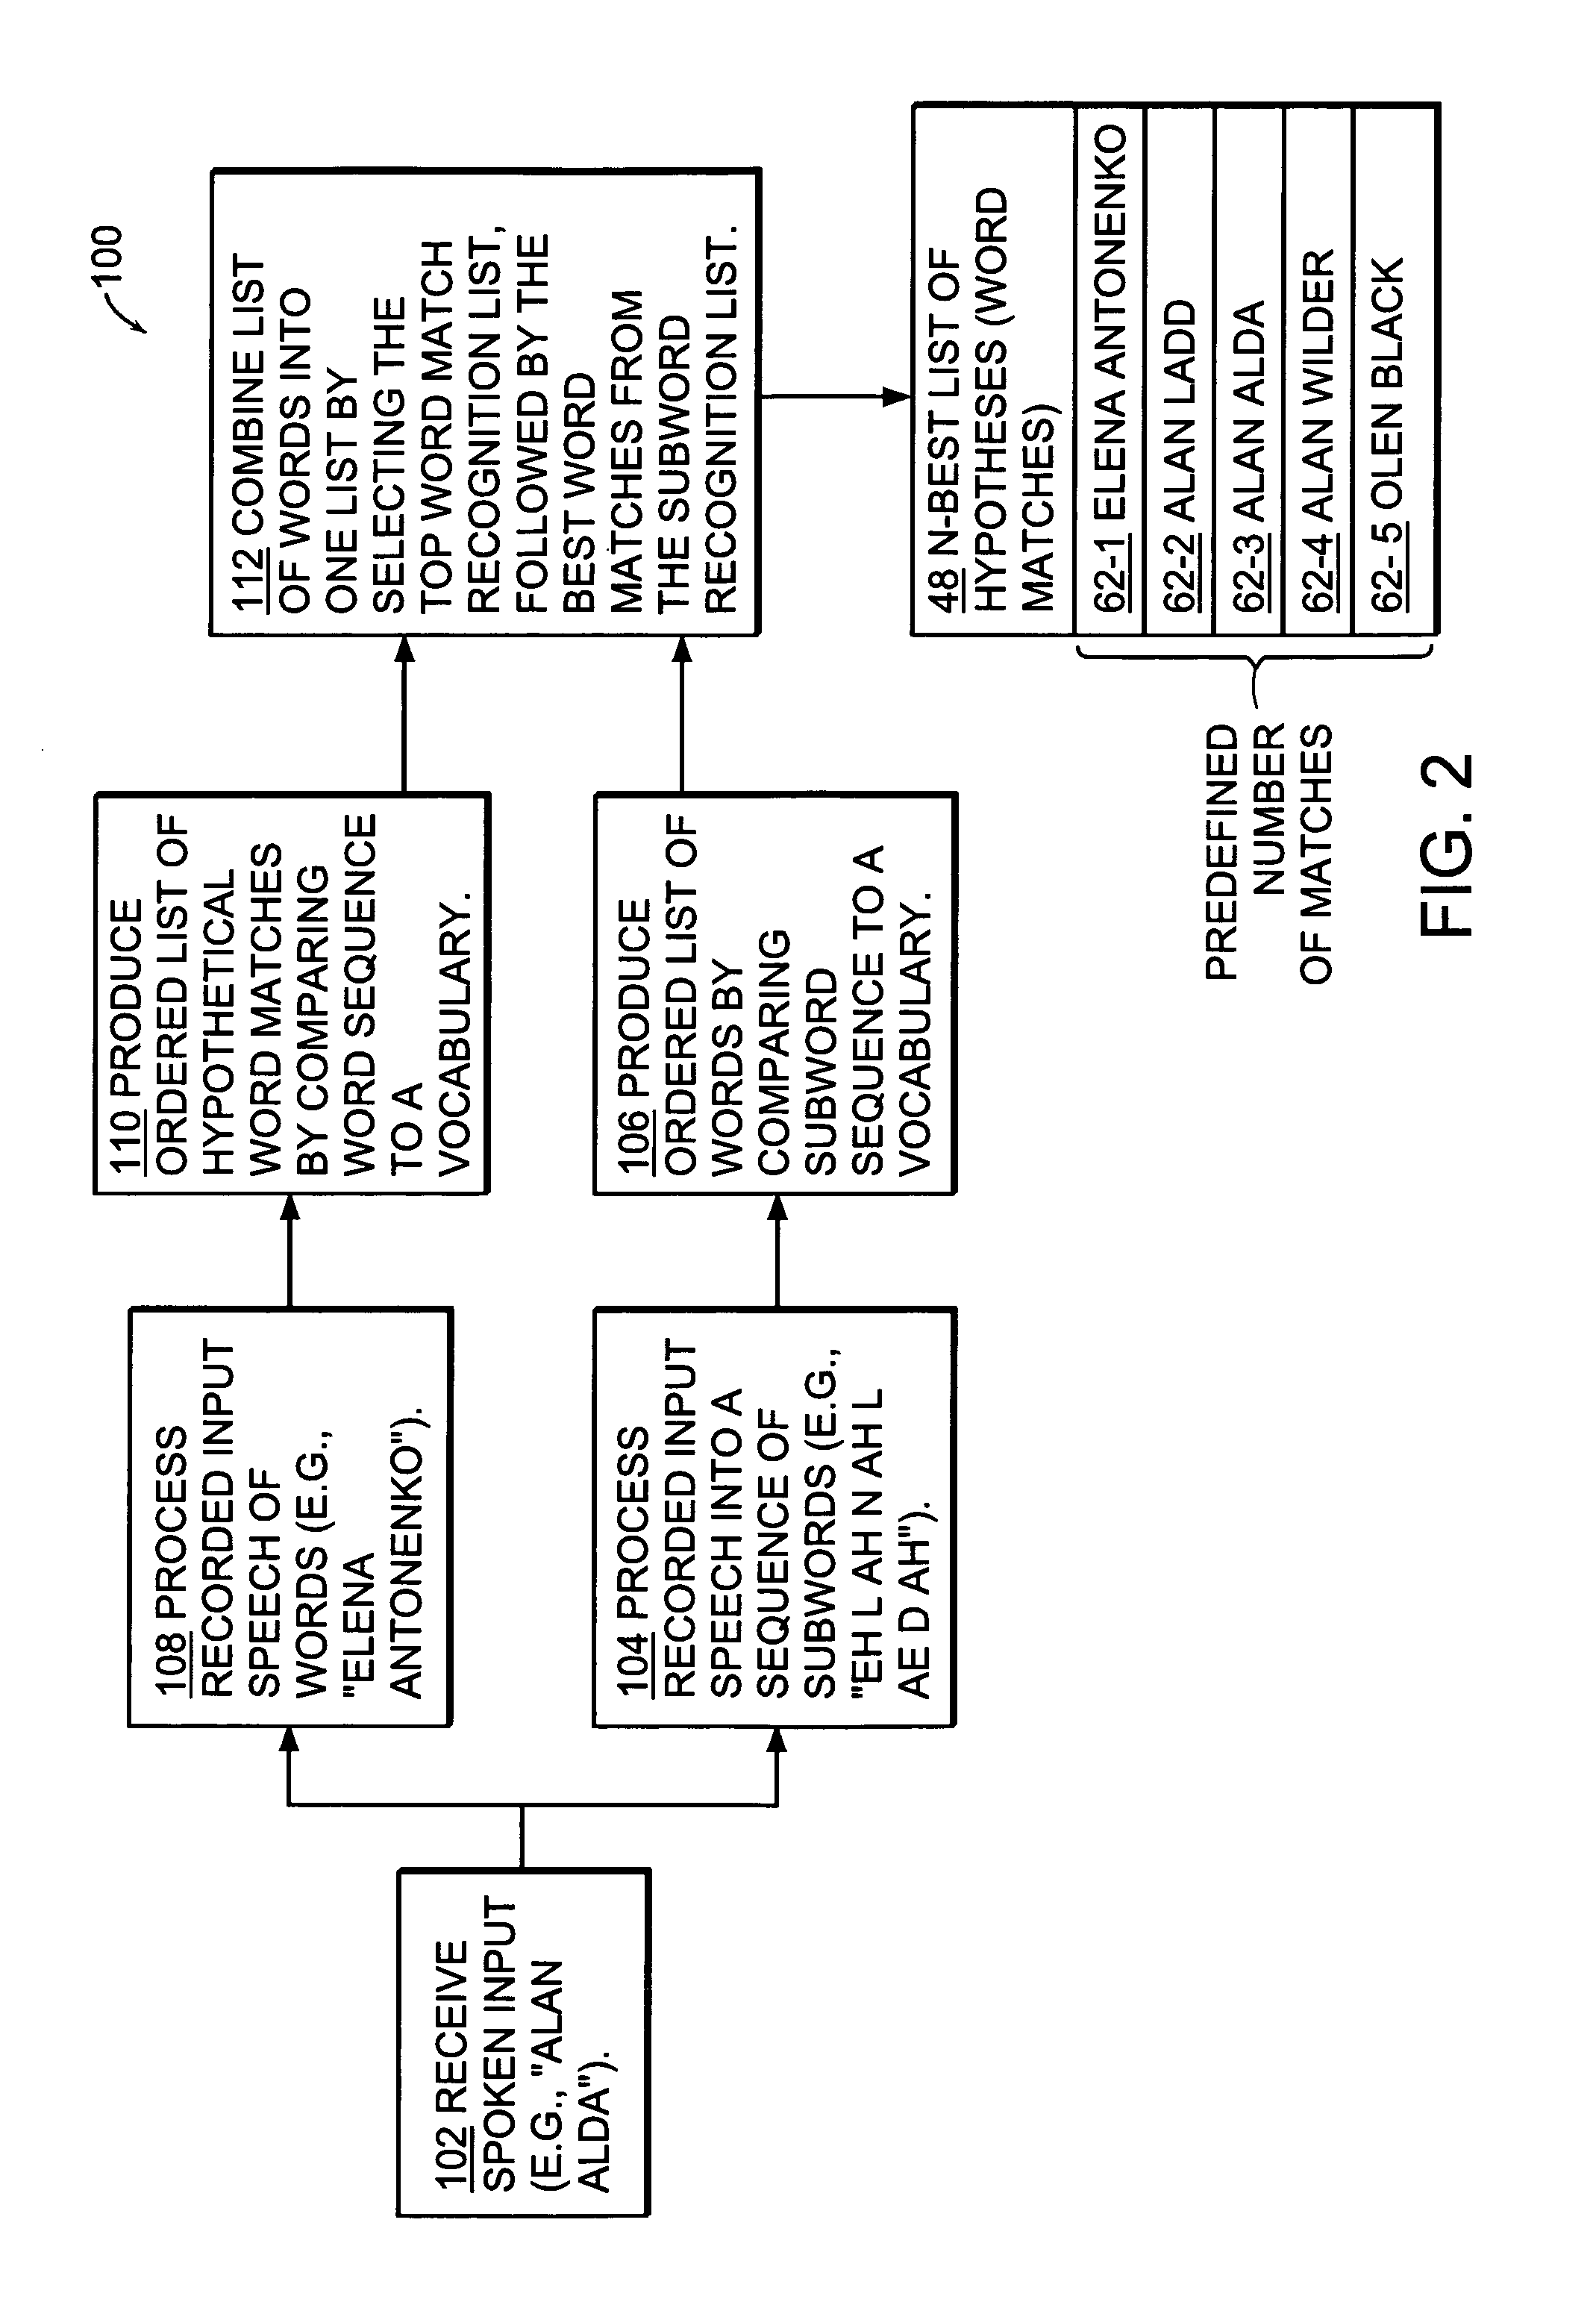 Systems and methods for combining subword recognition and whole word recognition of a spoken input